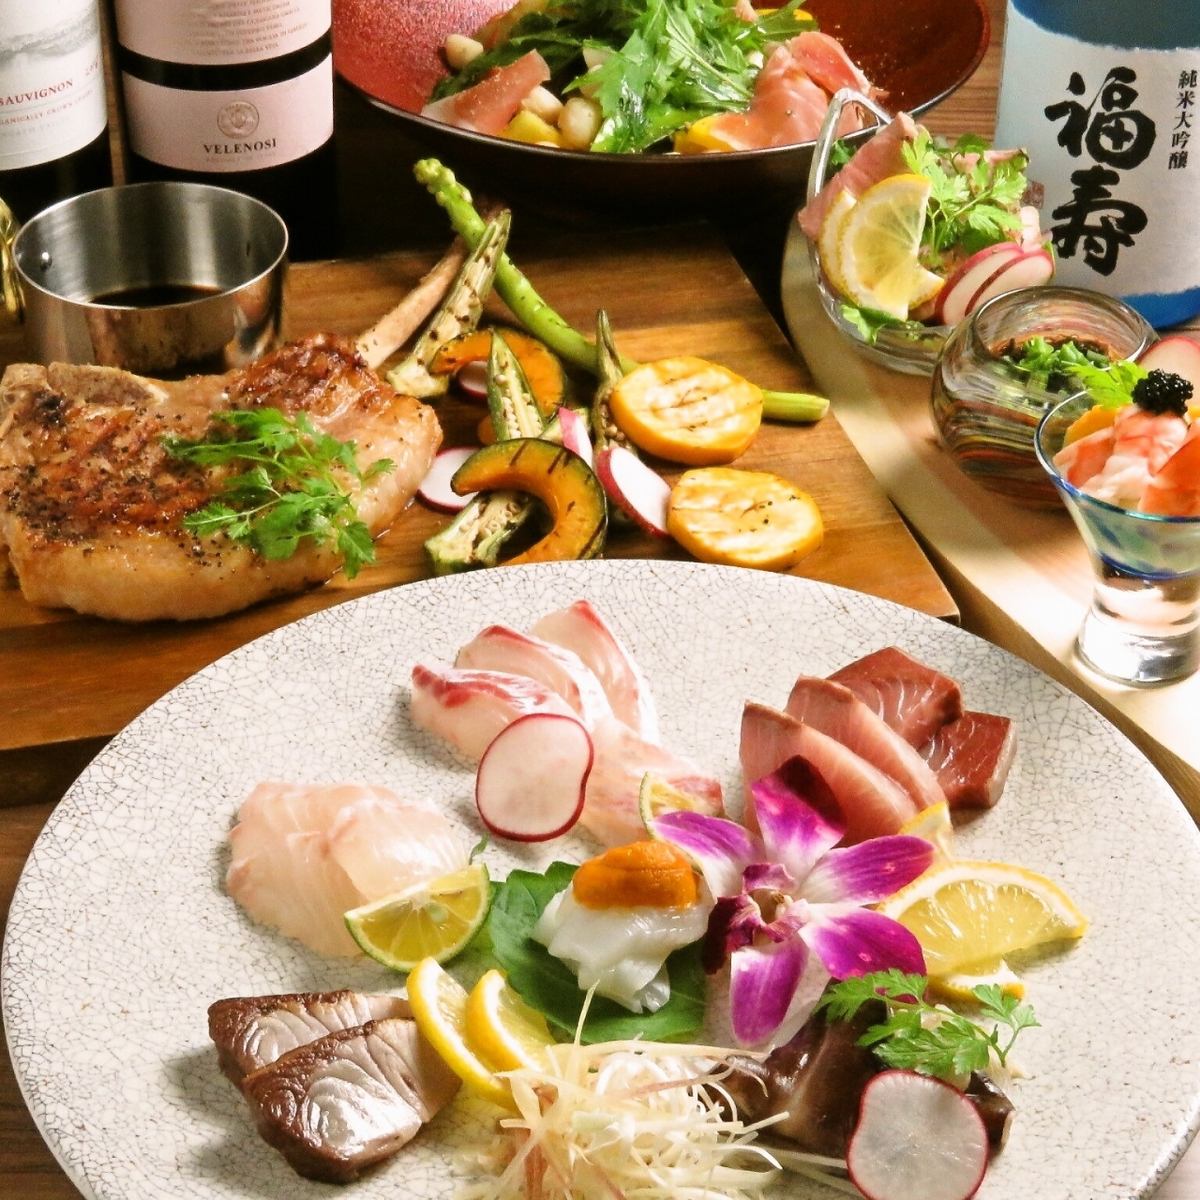 The restaurant has a view of the ocean and can be used as a cafe, restaurant, bar or izakaya.